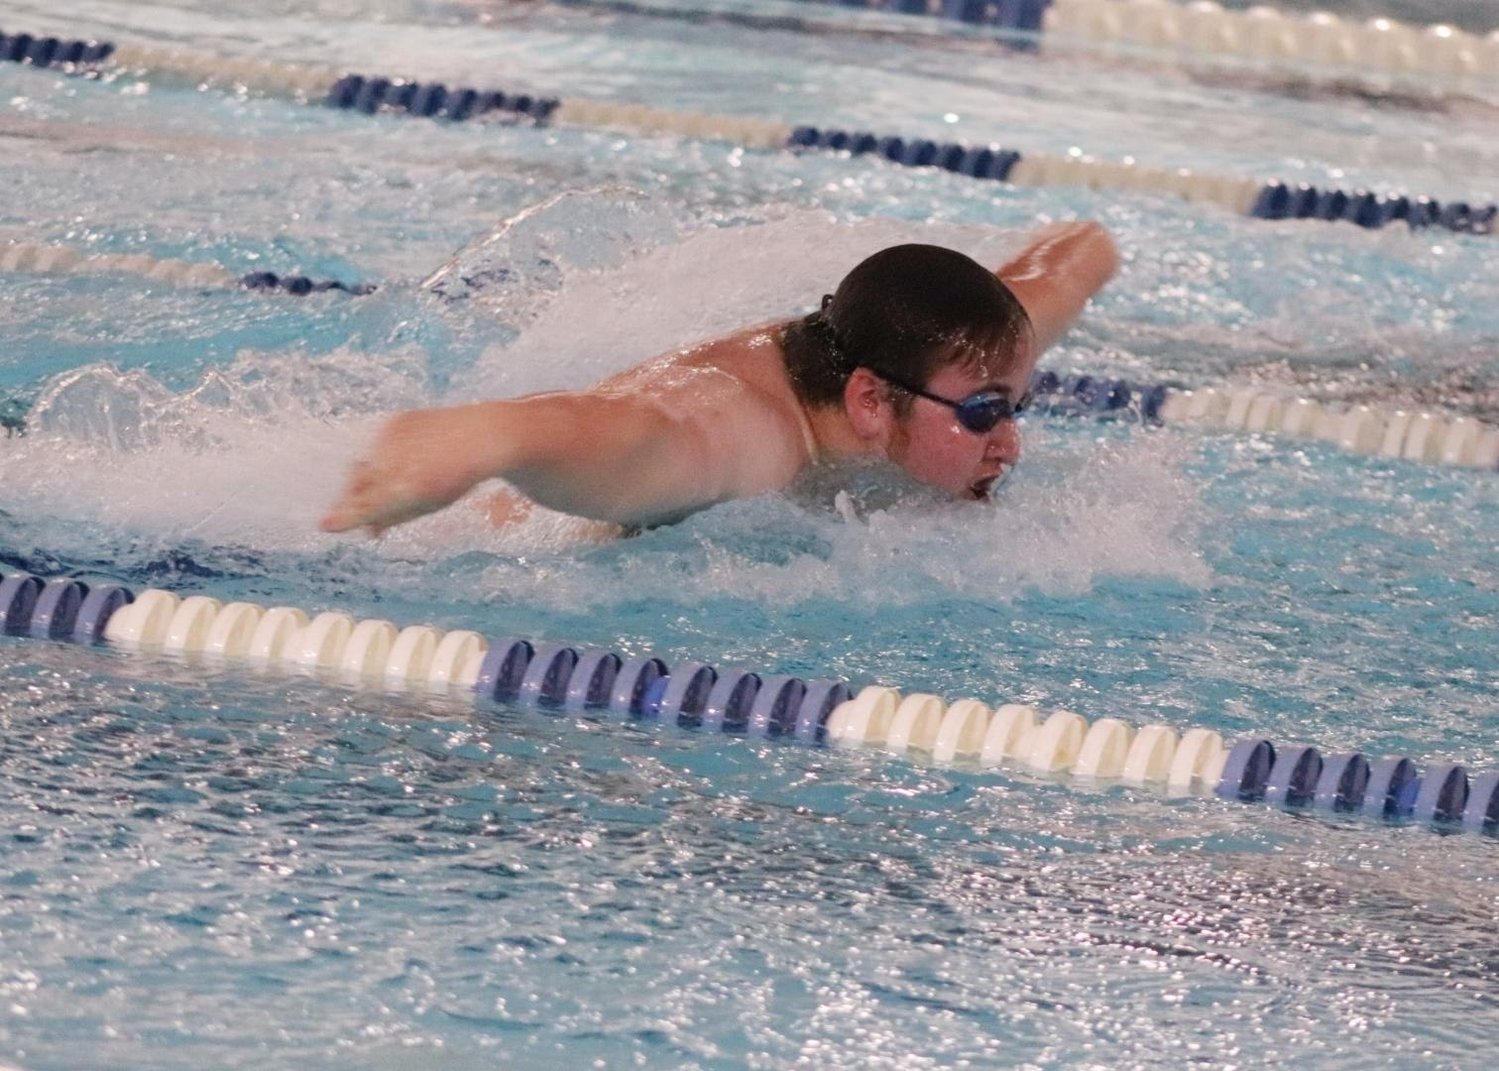 Hayden Davis competes in the 100 Butterfly.